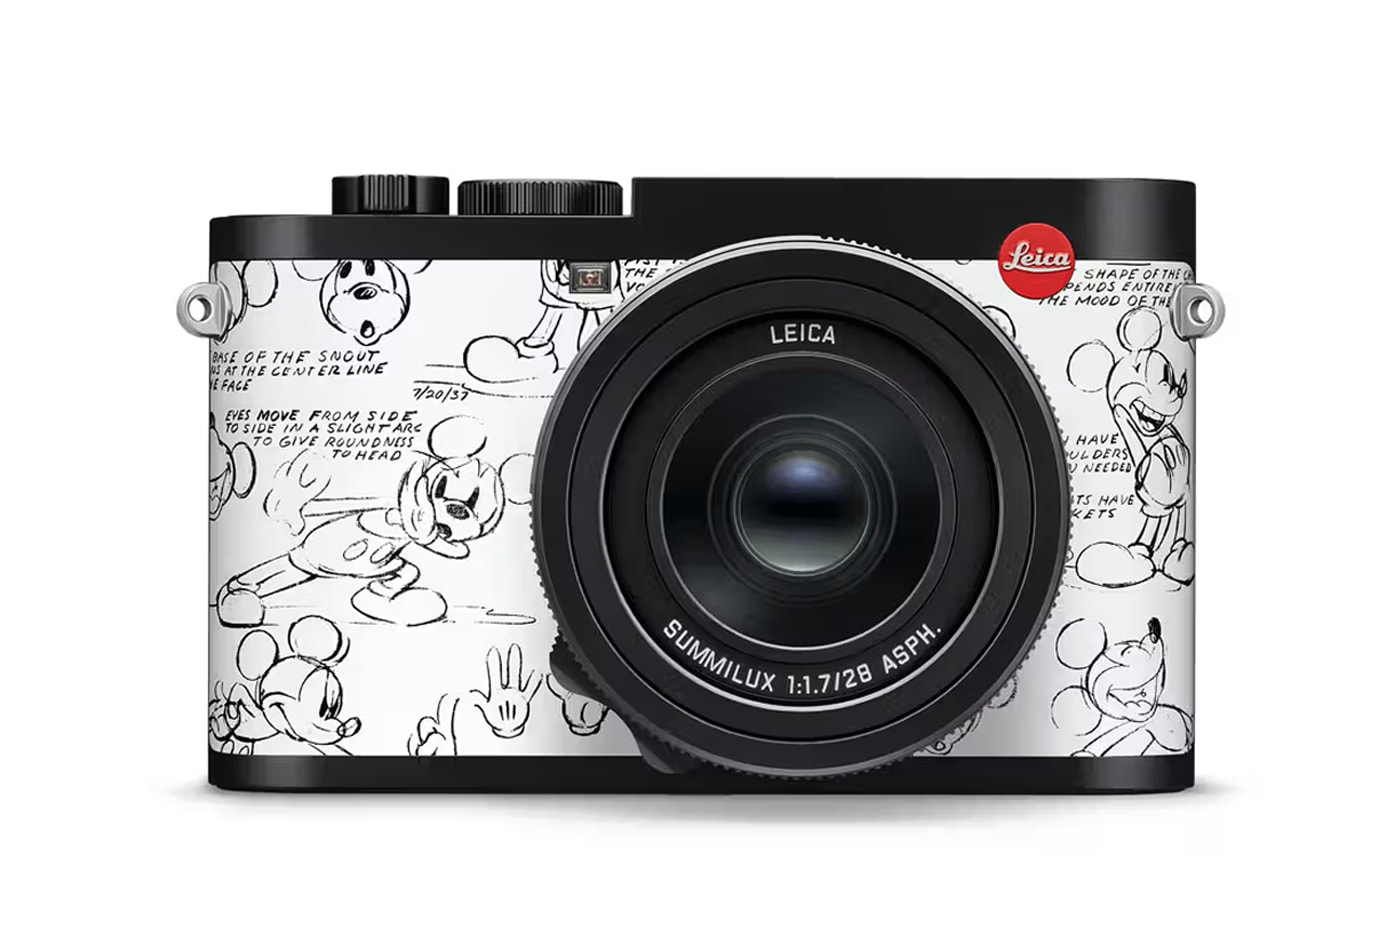 Leica Celebrates Disney's 100th Anniversary With a Limited-Edition Camera Collaboration